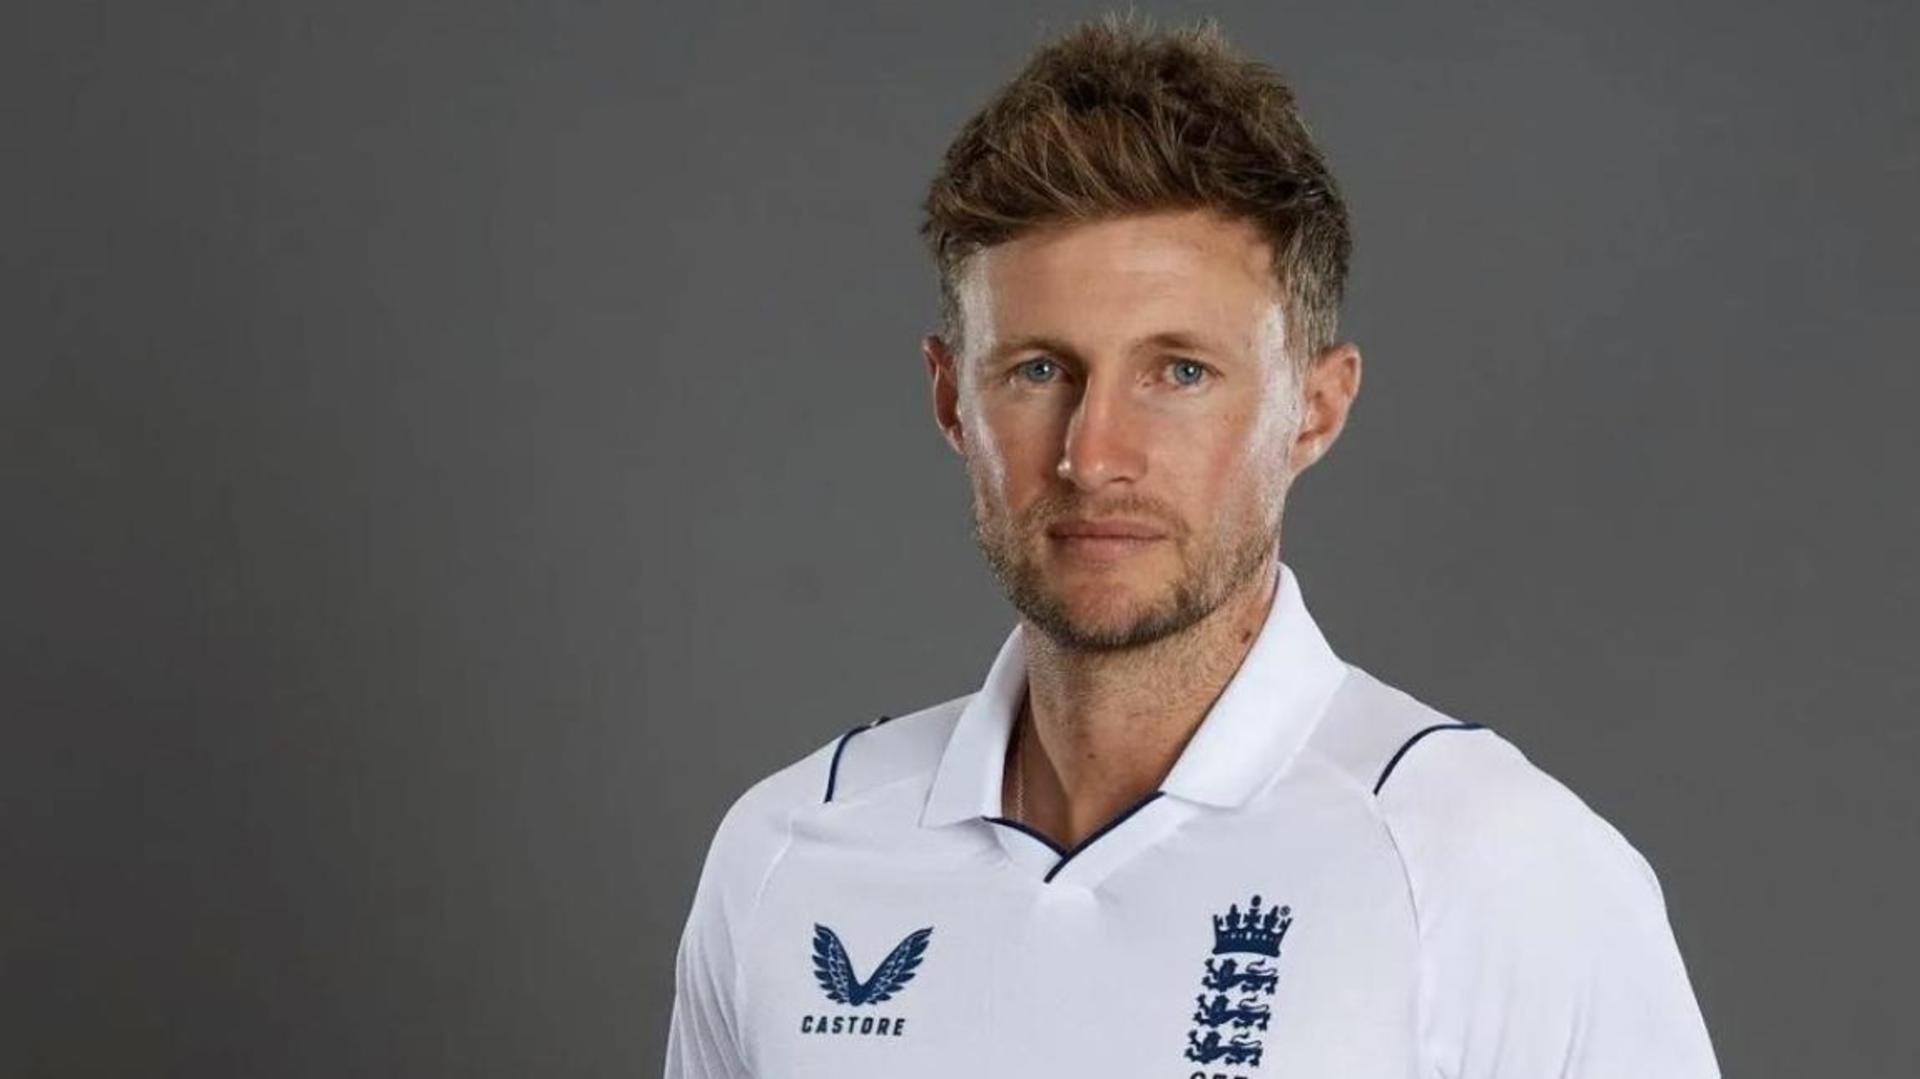 ICC Test Rankings: Joe Root becomes the number one batter